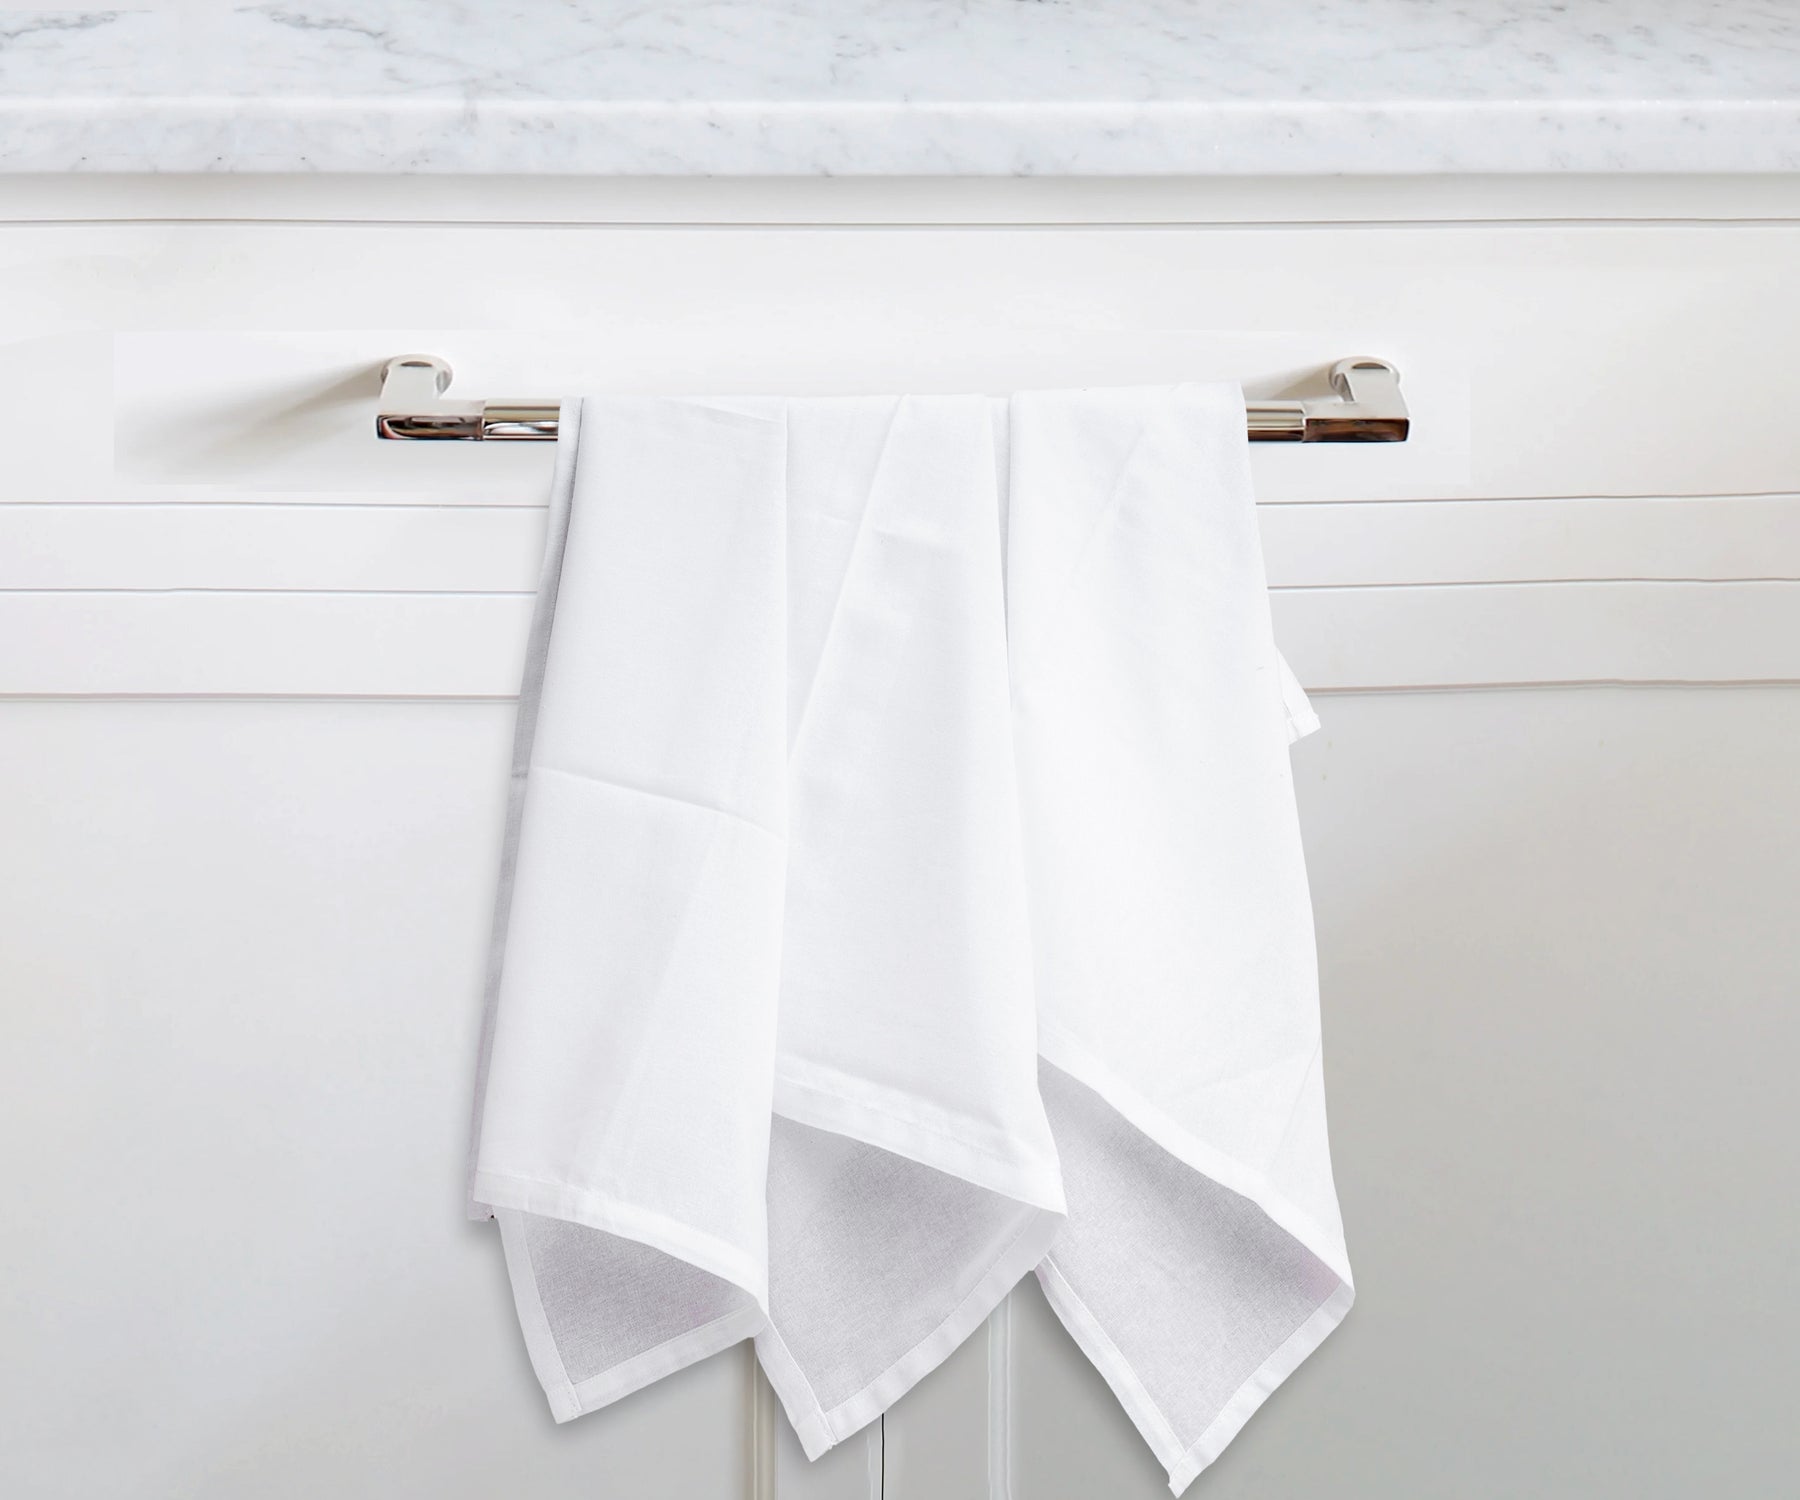 kitchen towels cotton for wedding are most absorbent kitchen towels, cotton flour sack towels for kitchen use.